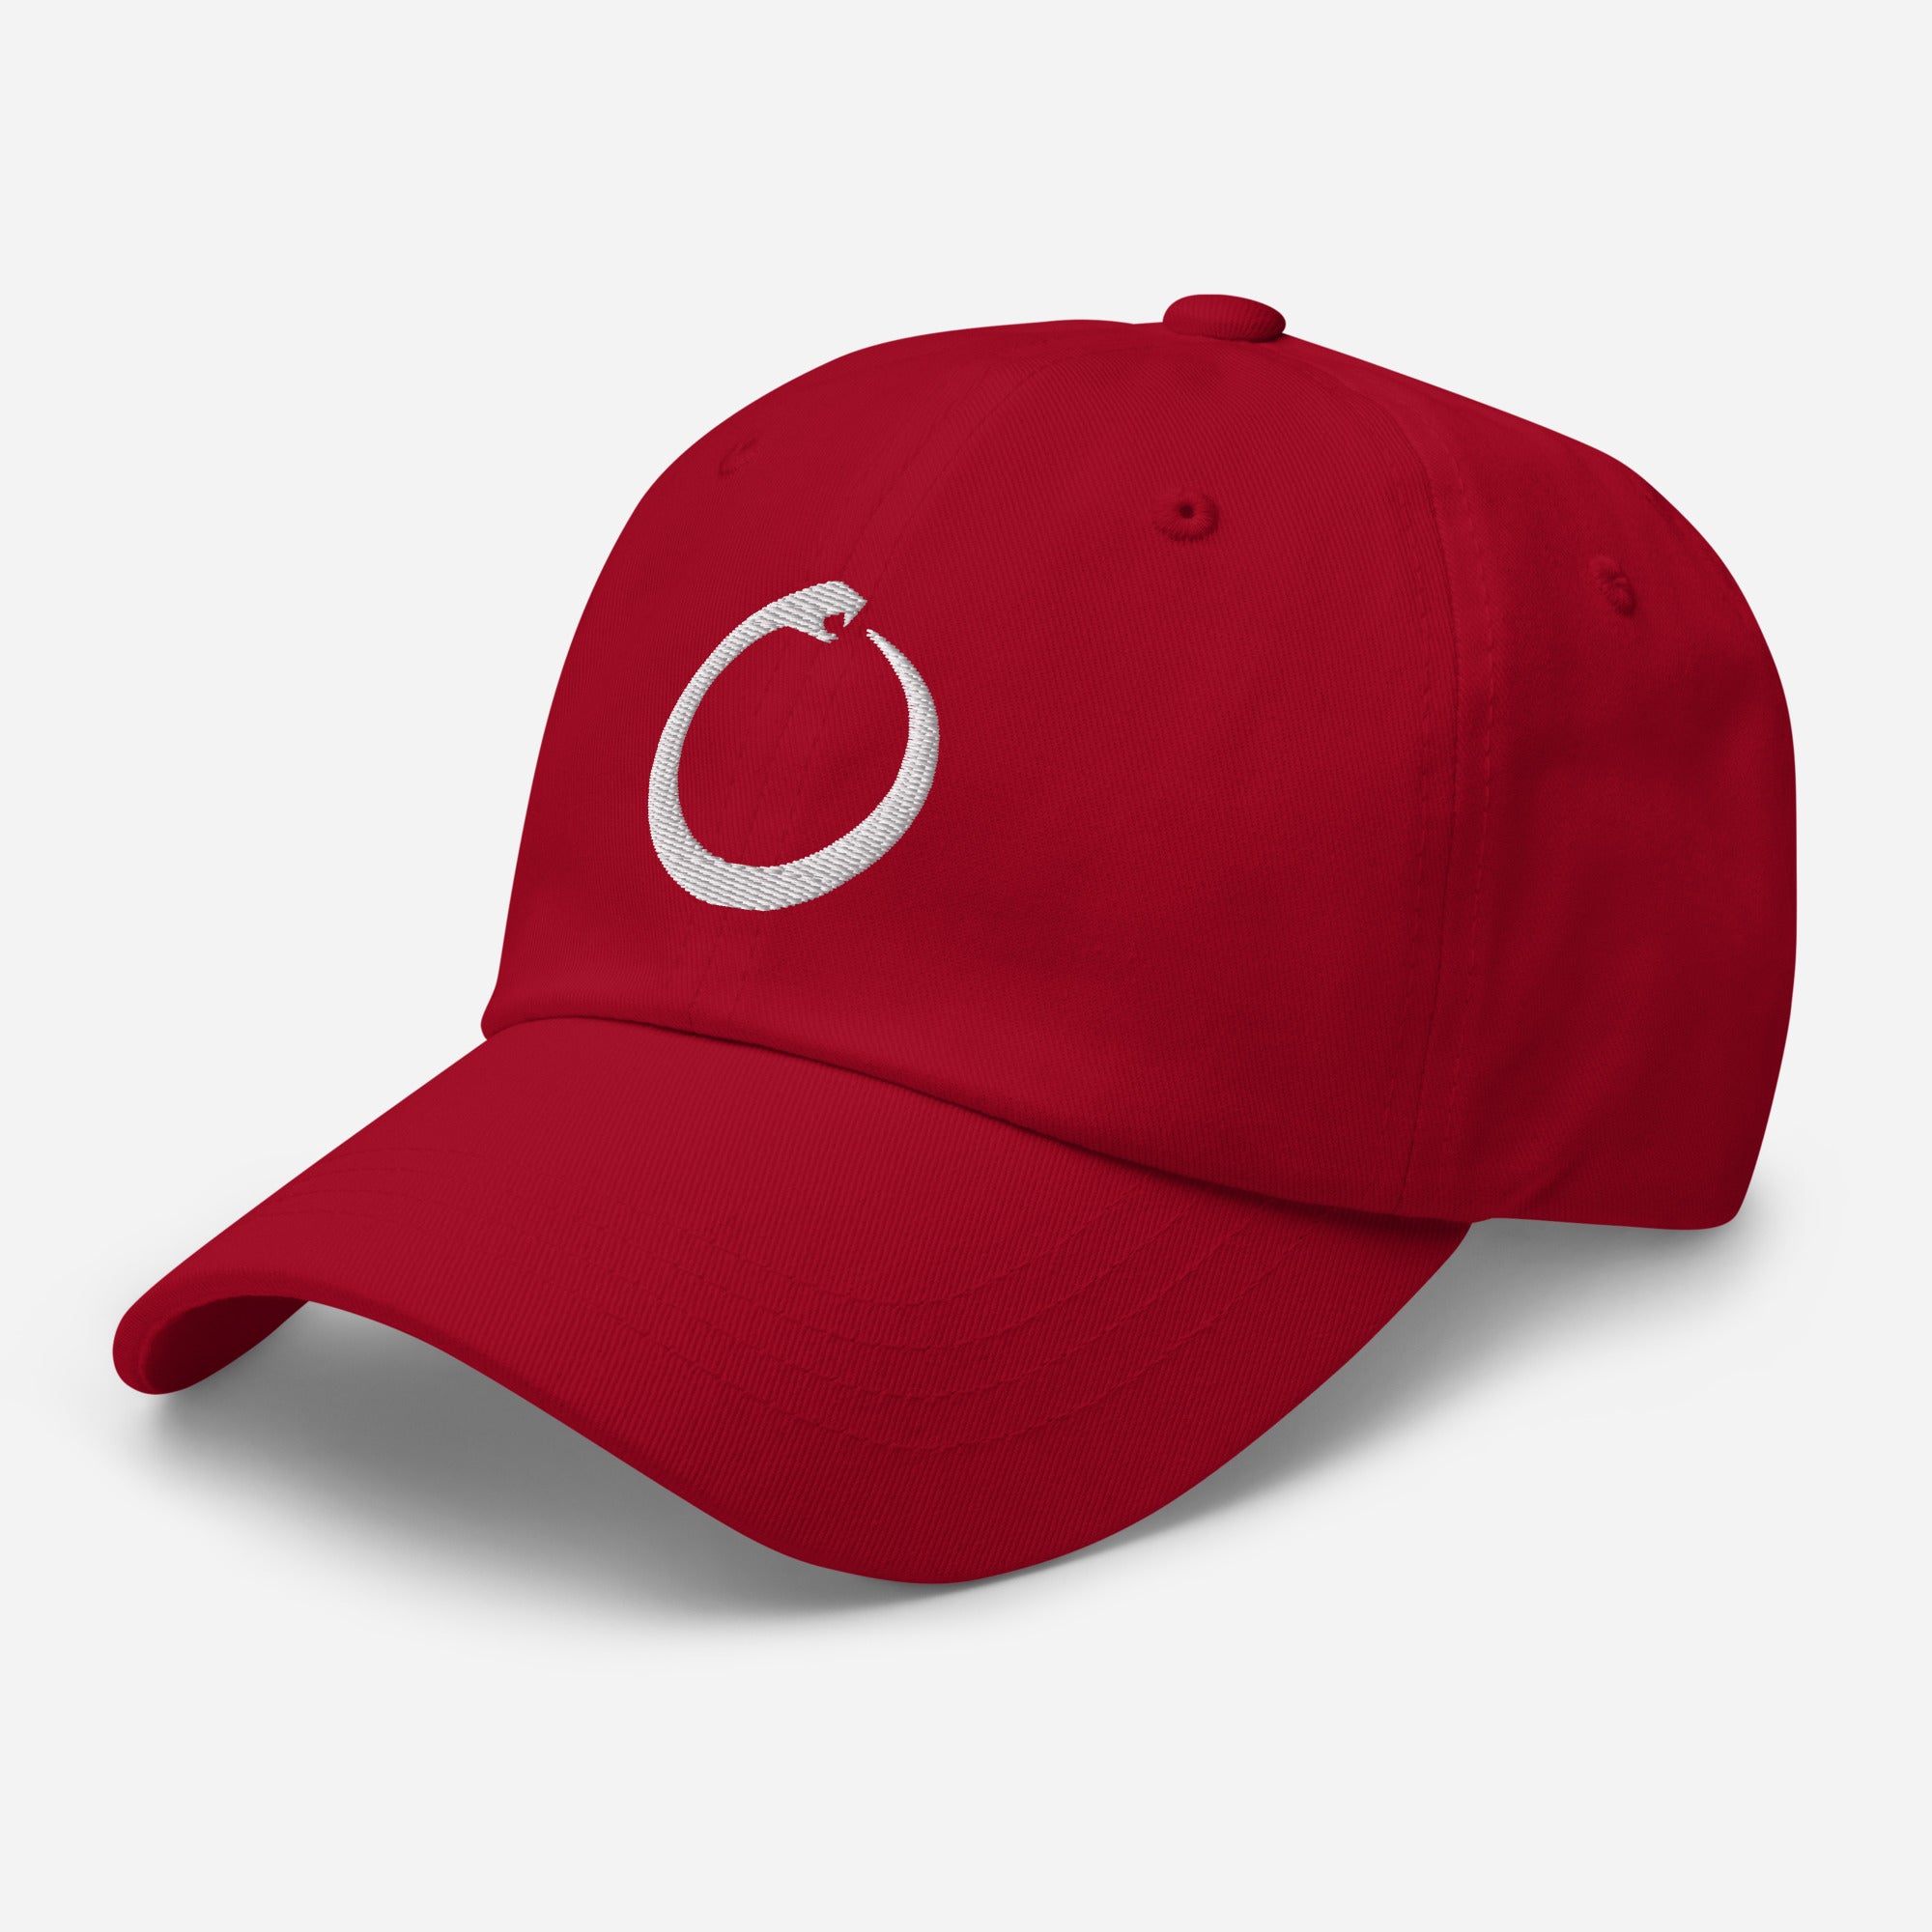 Ouroboros Snake Eating Tail Alchemy Symbol Embroidered Baseball Cap Dad hat